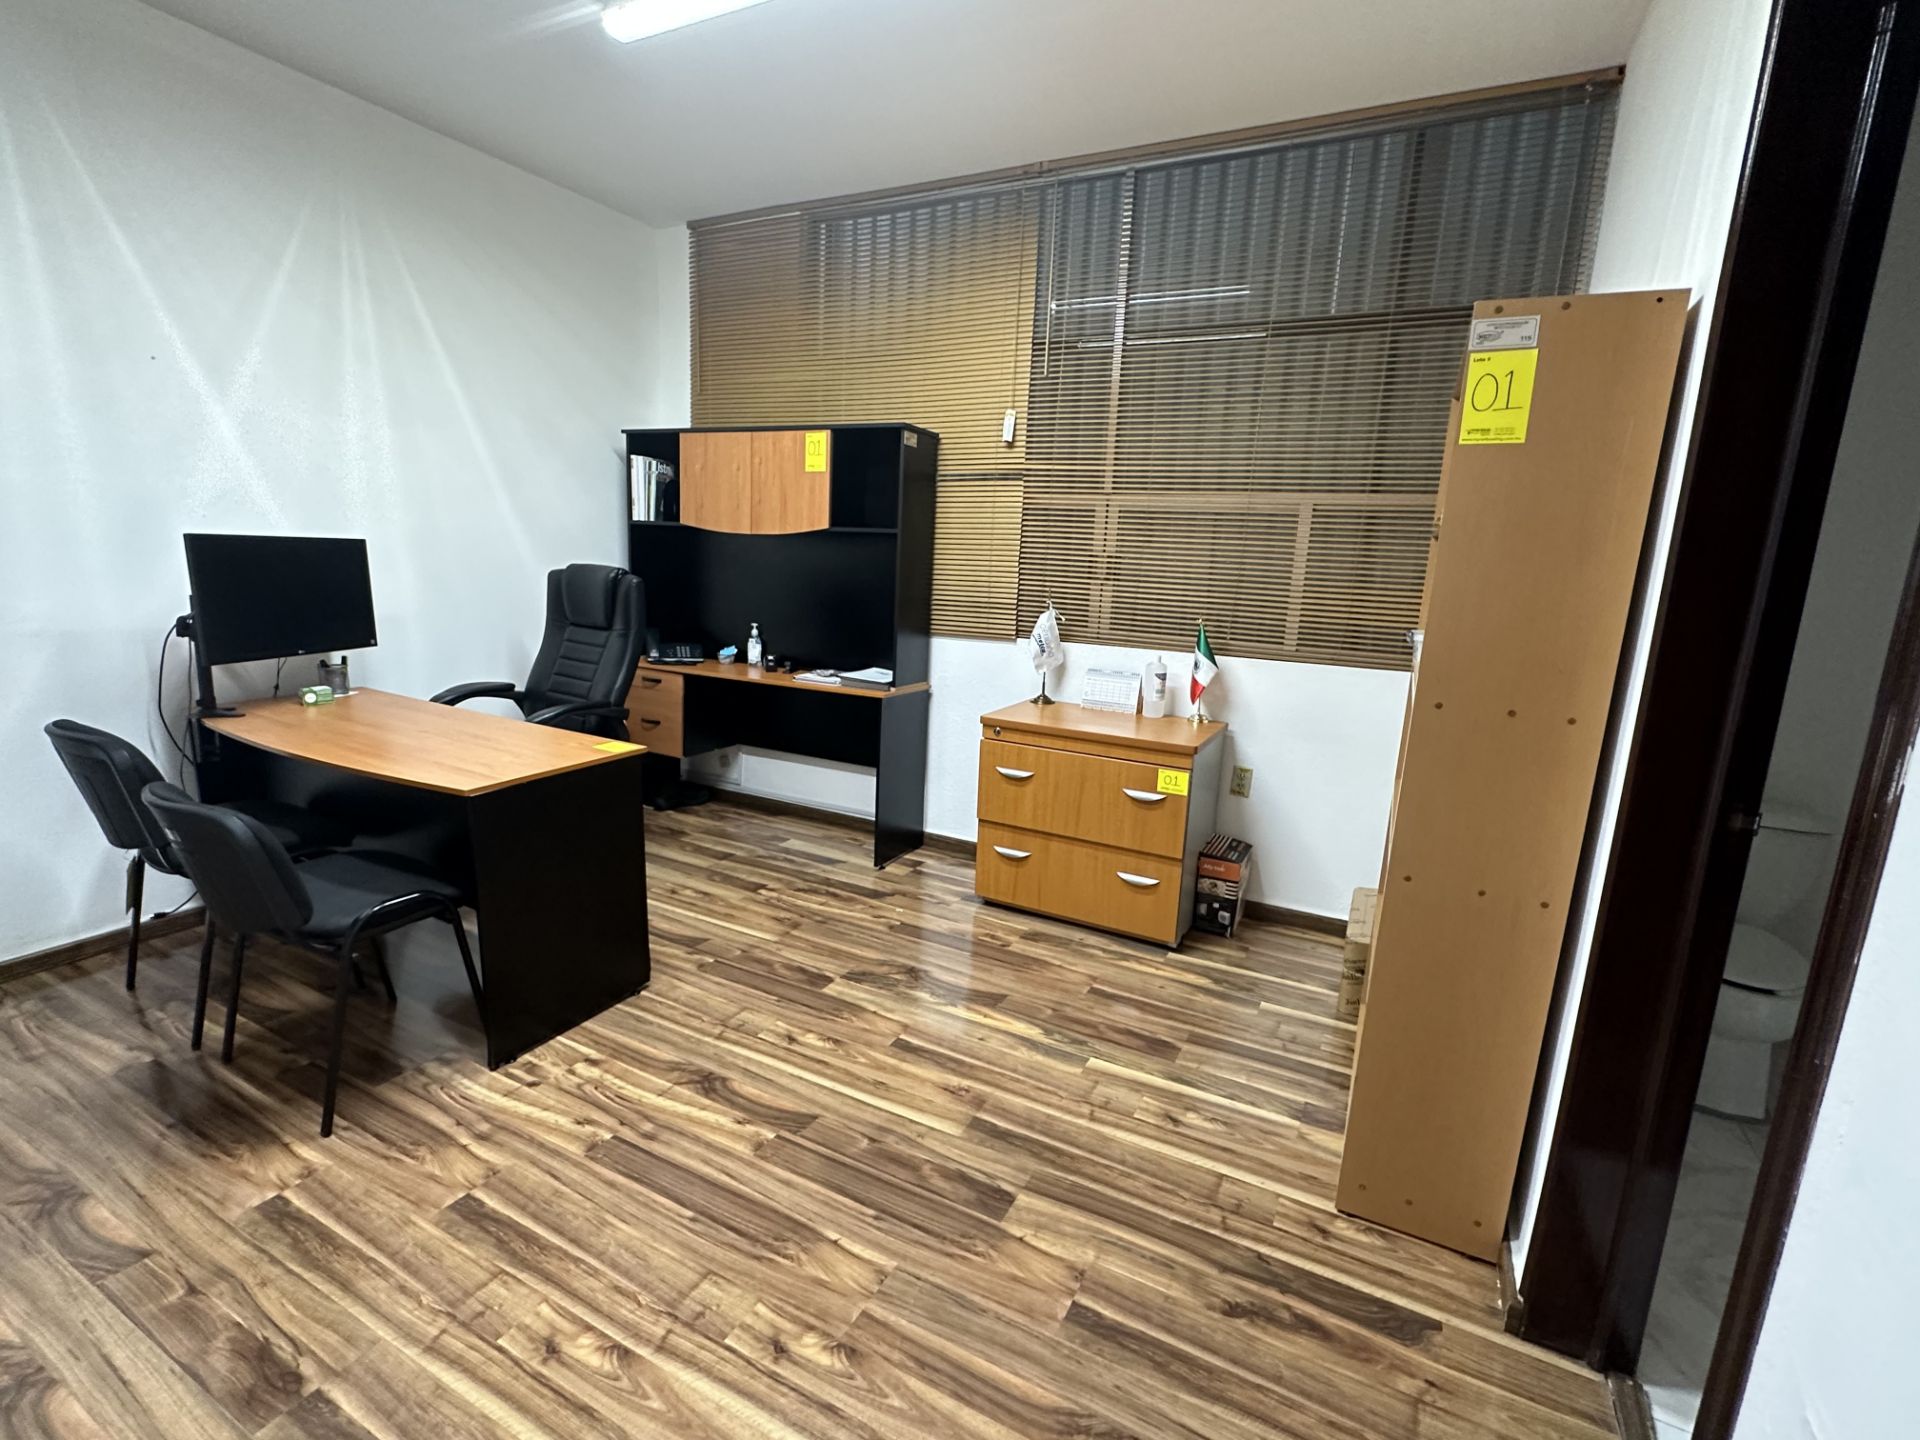 Lot of office furniture includes: 1 Desk in brown wood measures approximately 1.50 x 0.60 x 0.75 m; - Image 3 of 18